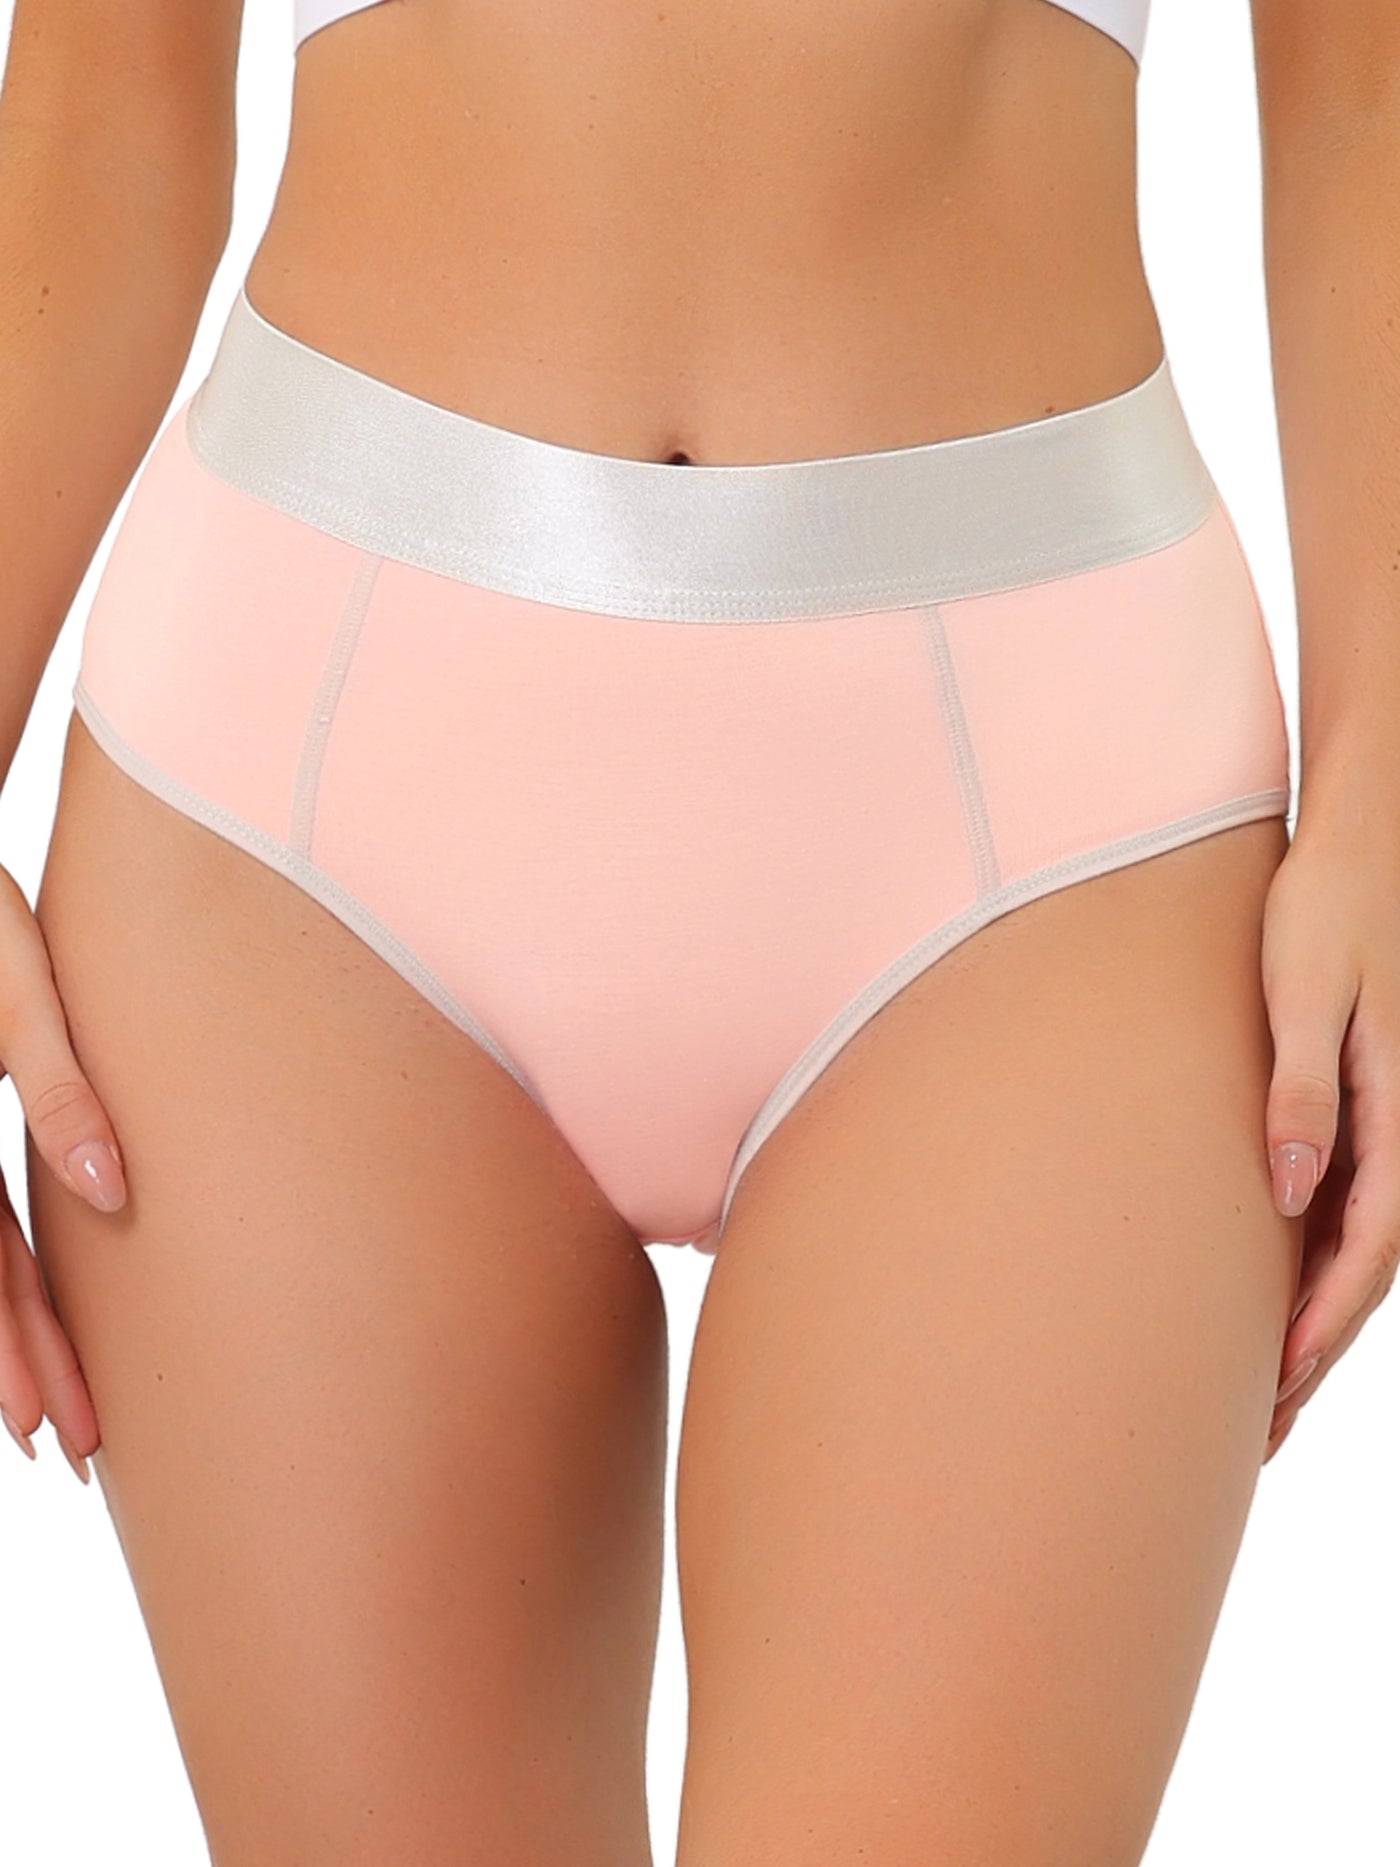 Allegra K Panties for Women (Available in Plus Size), High Waisted Tummy Control Brief